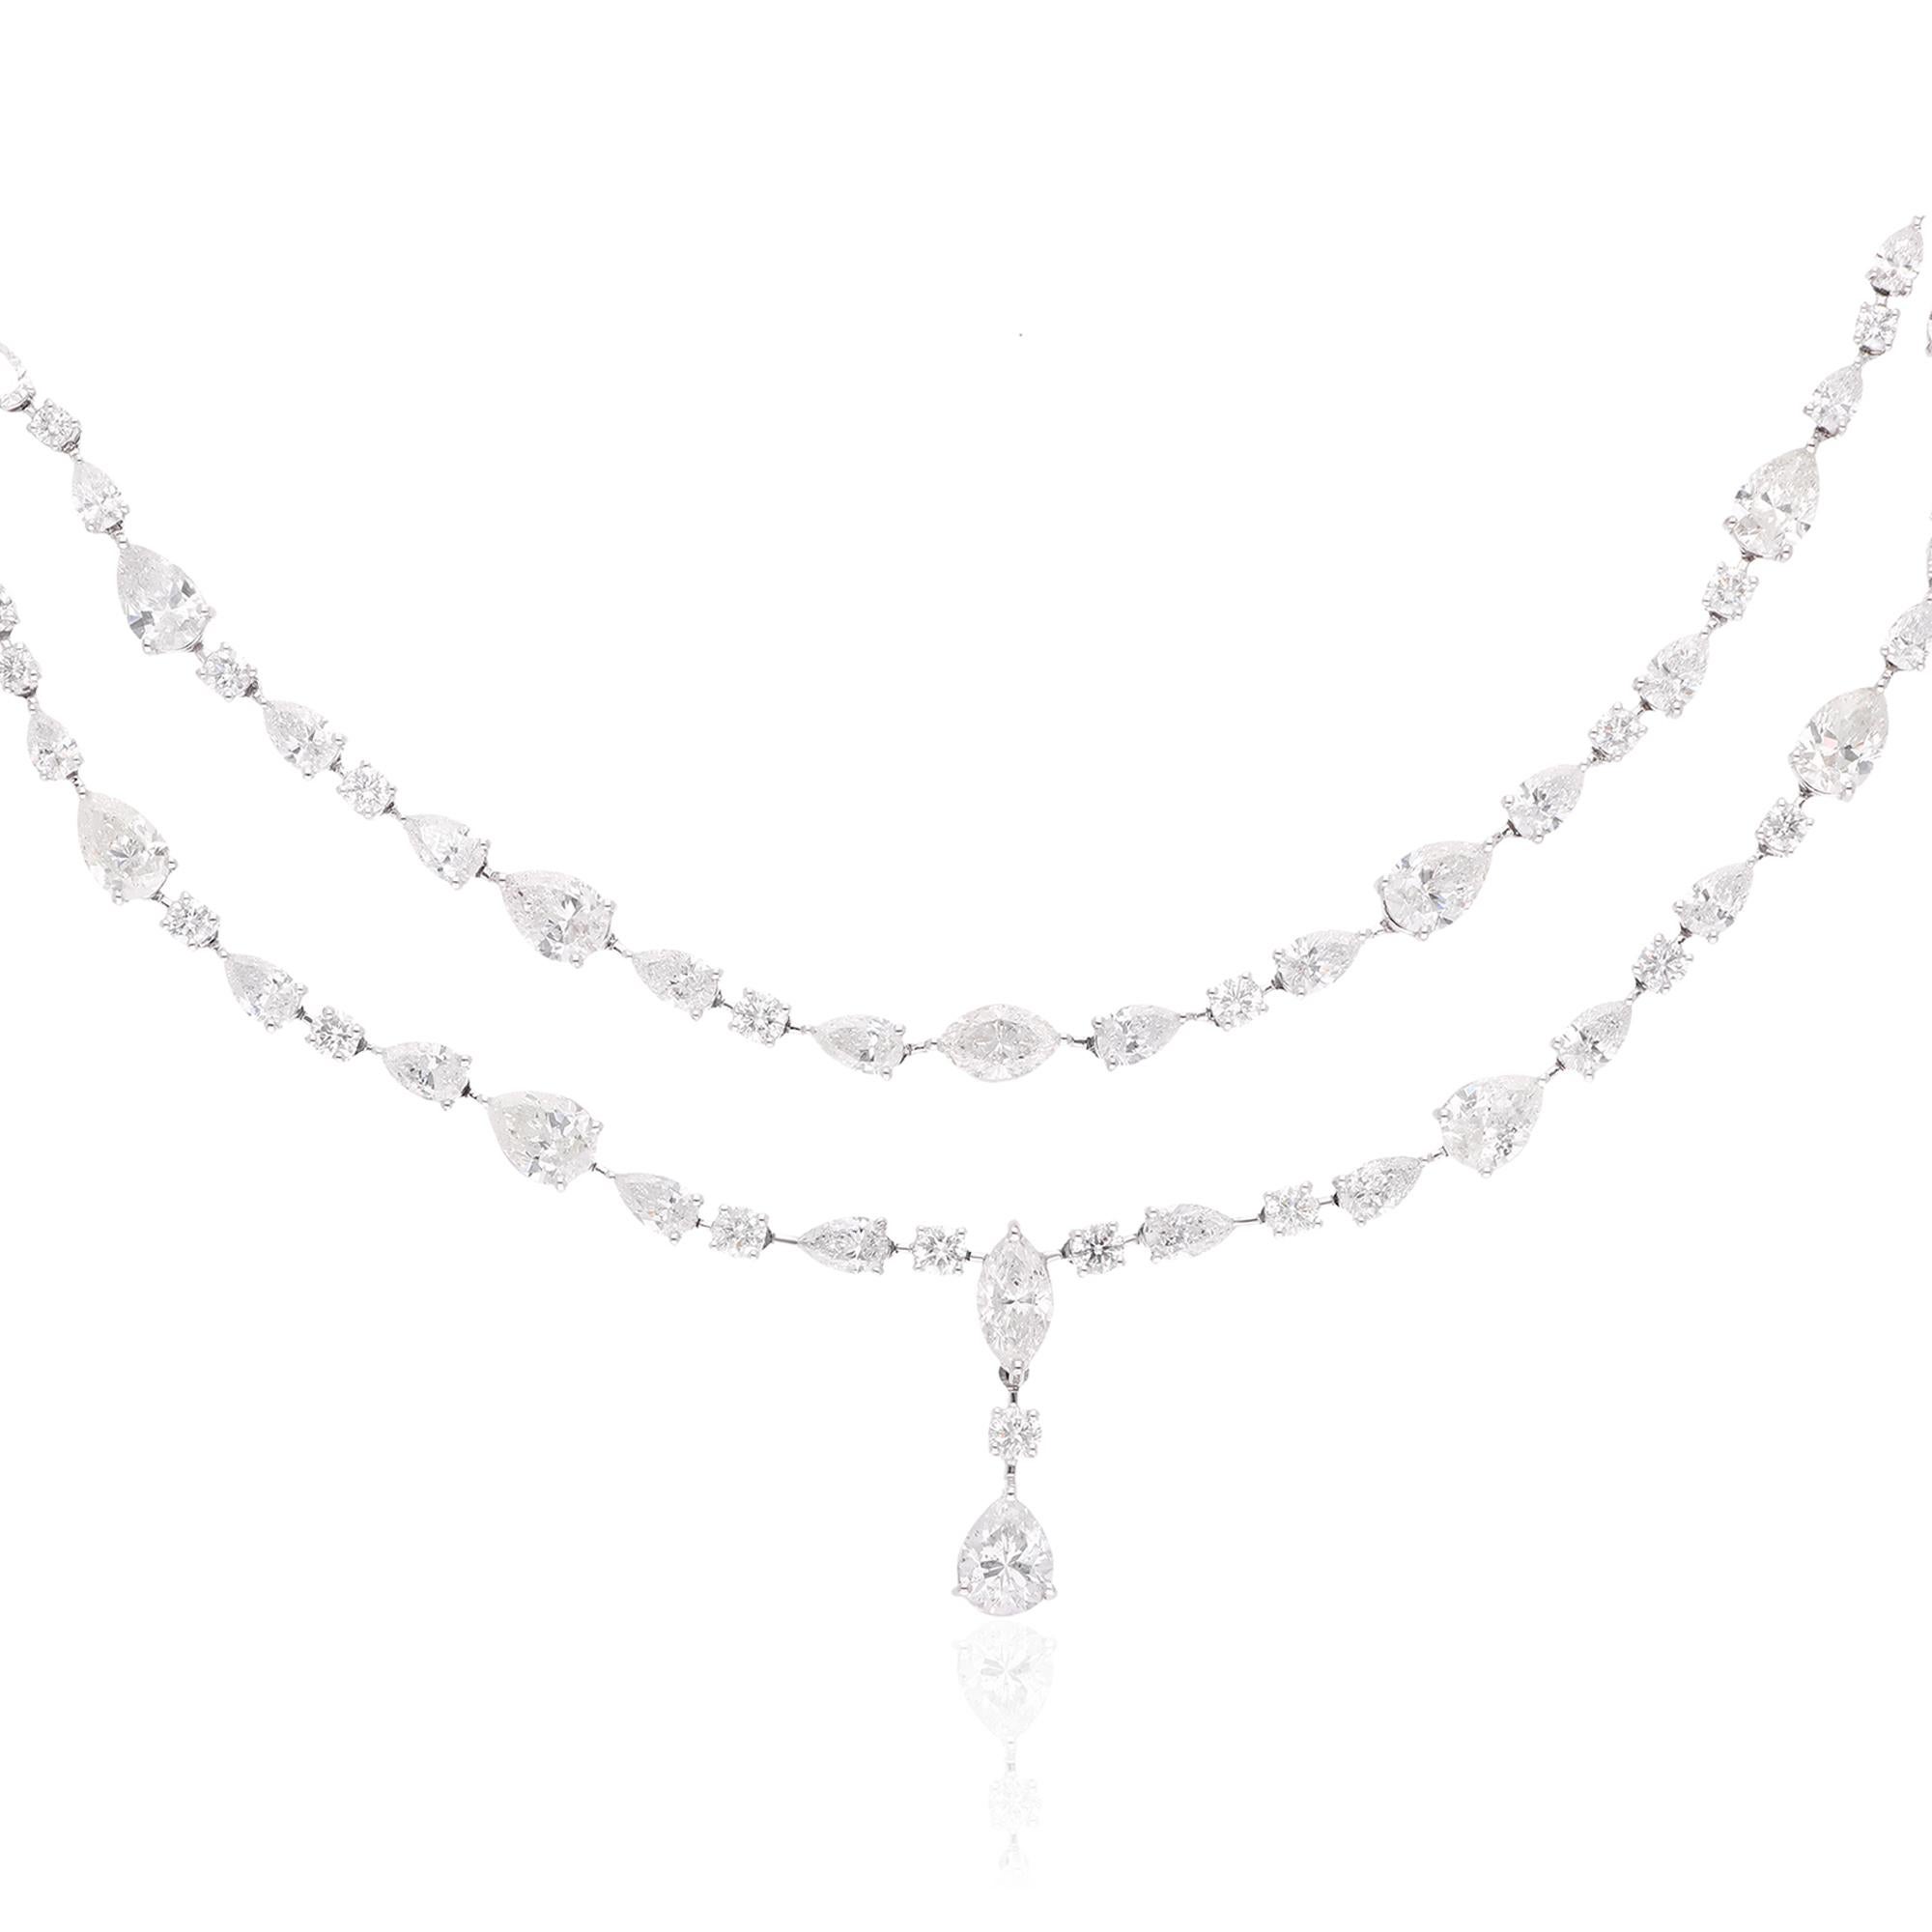 Every aspect of this necklace exudes luxury and exclusivity, from the carefully chosen materials to the impeccable craftsmanship. Whether worn as a statement piece for a special occasion or as an everyday indulgence, this diamond necklace exudes